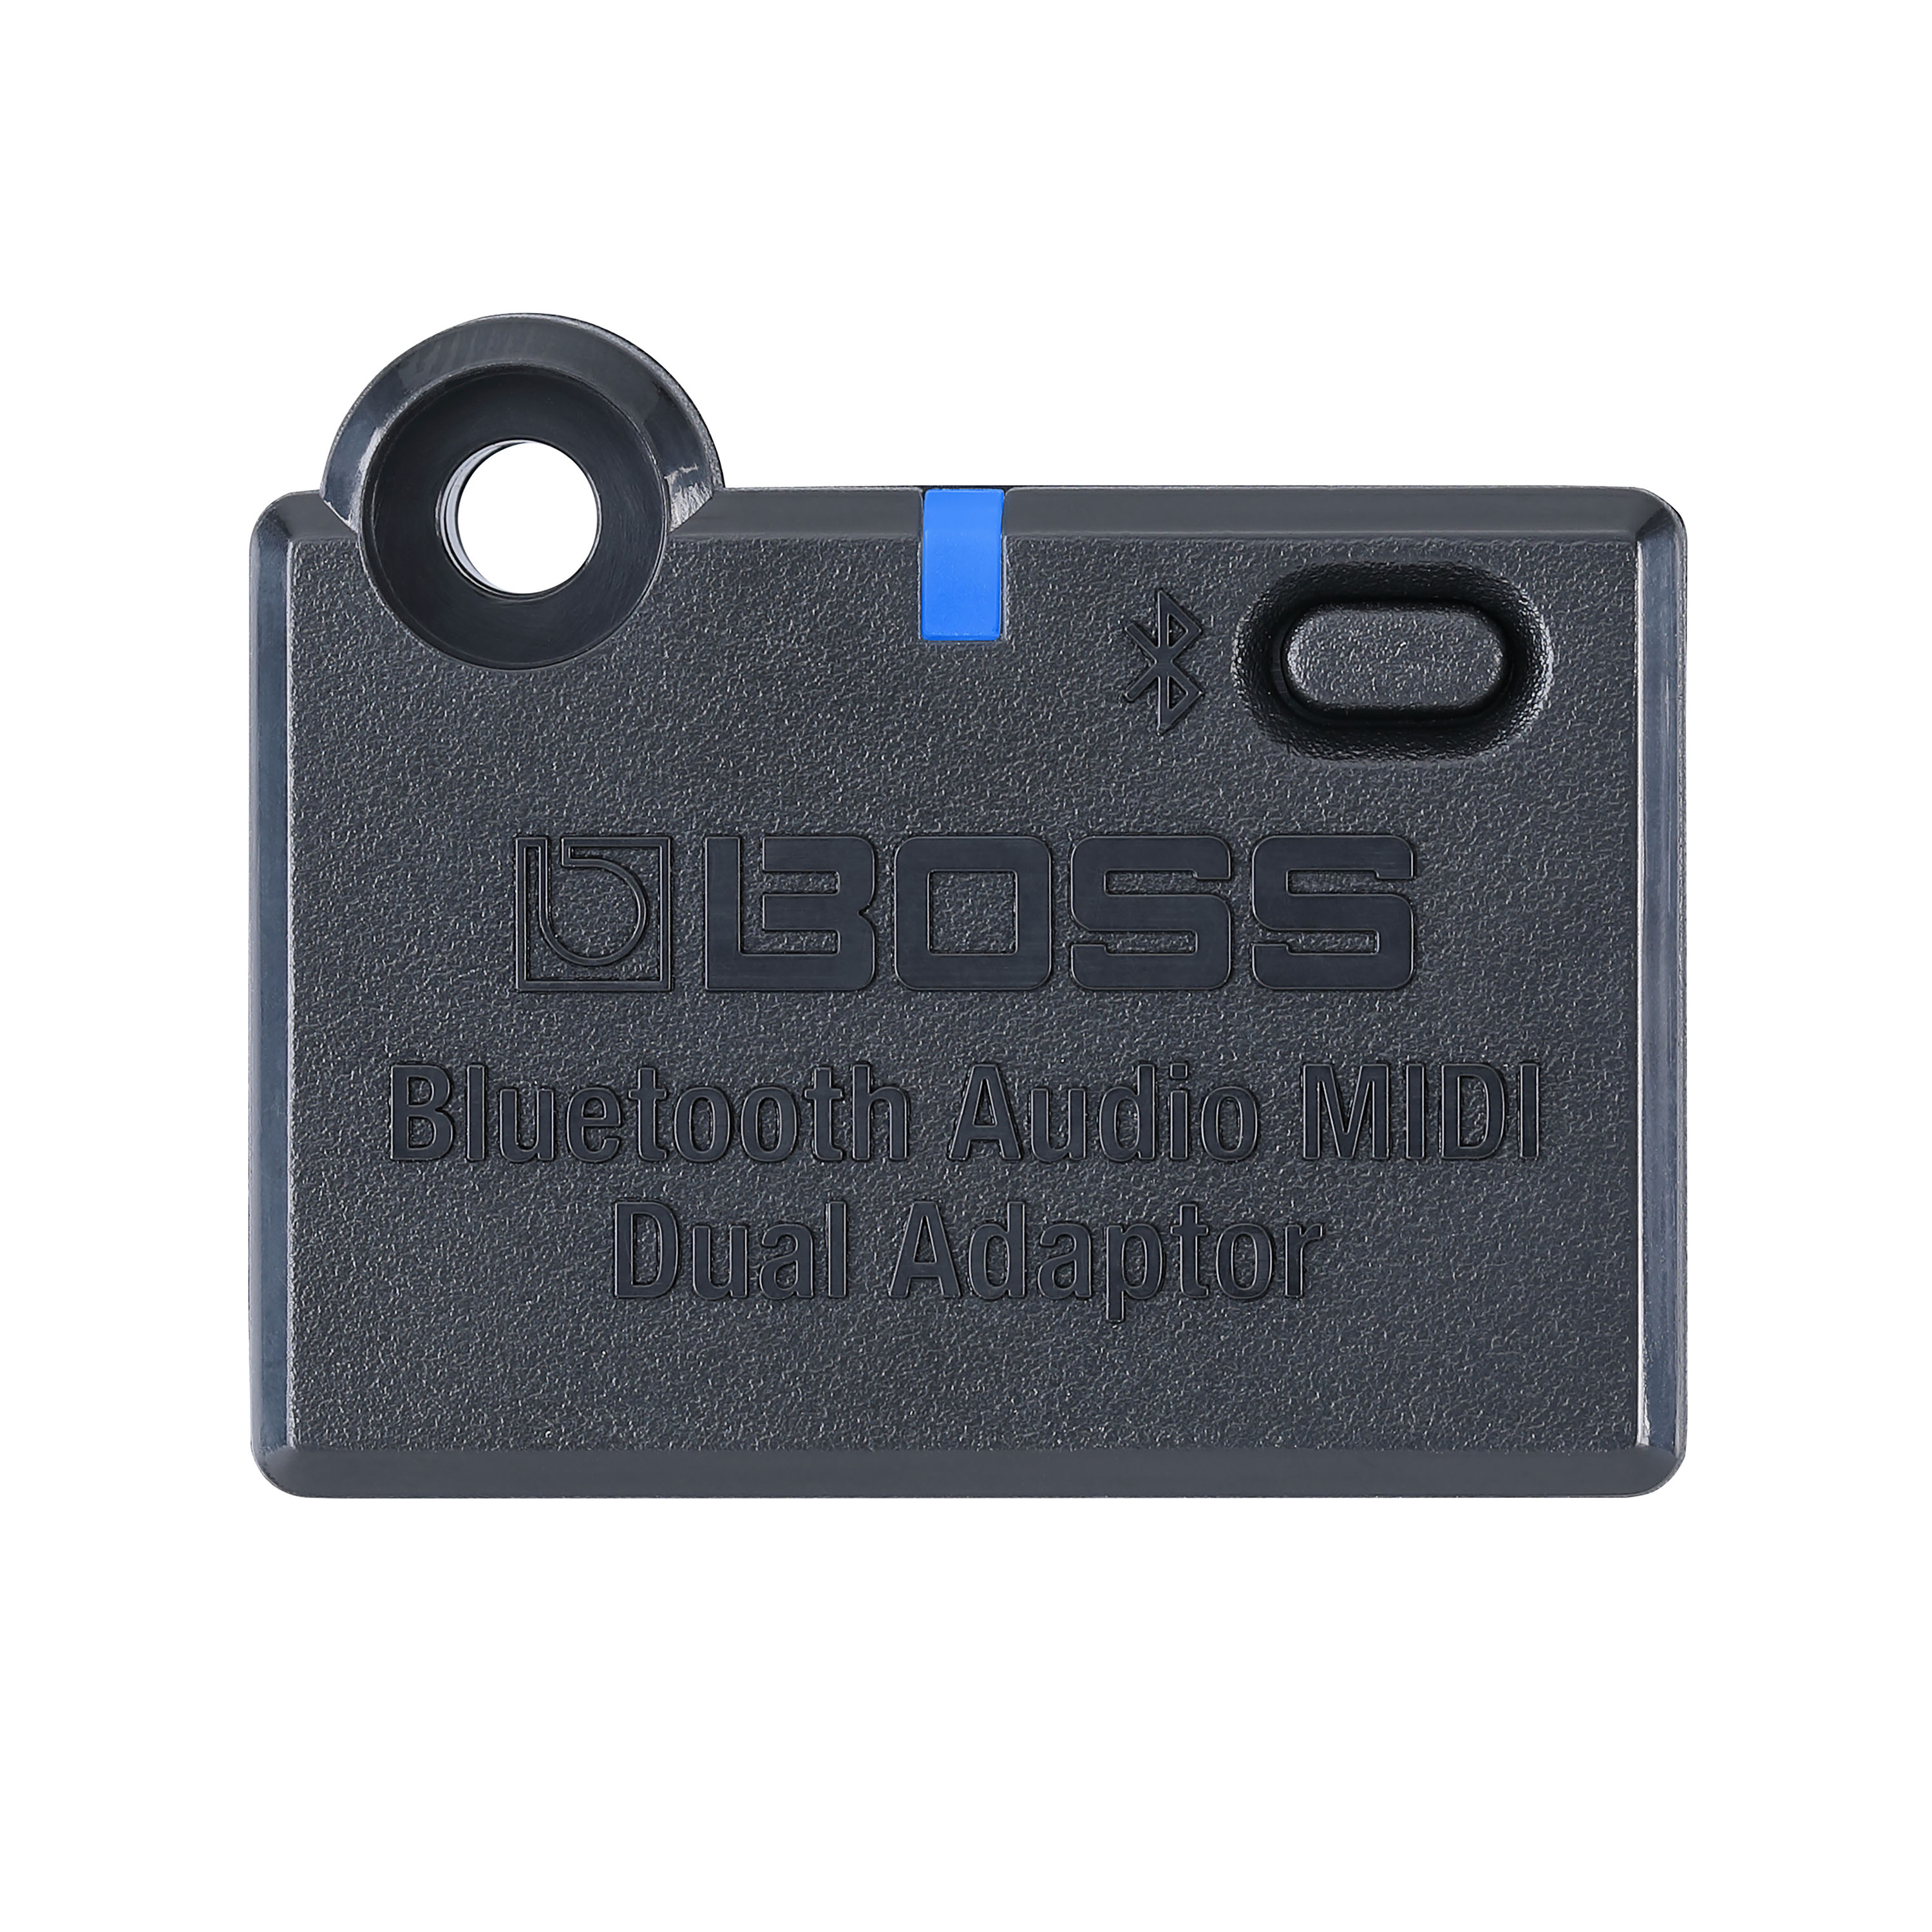 Boss Bluetooth Audio Adaptator - More access for guitar effects - Variation 1